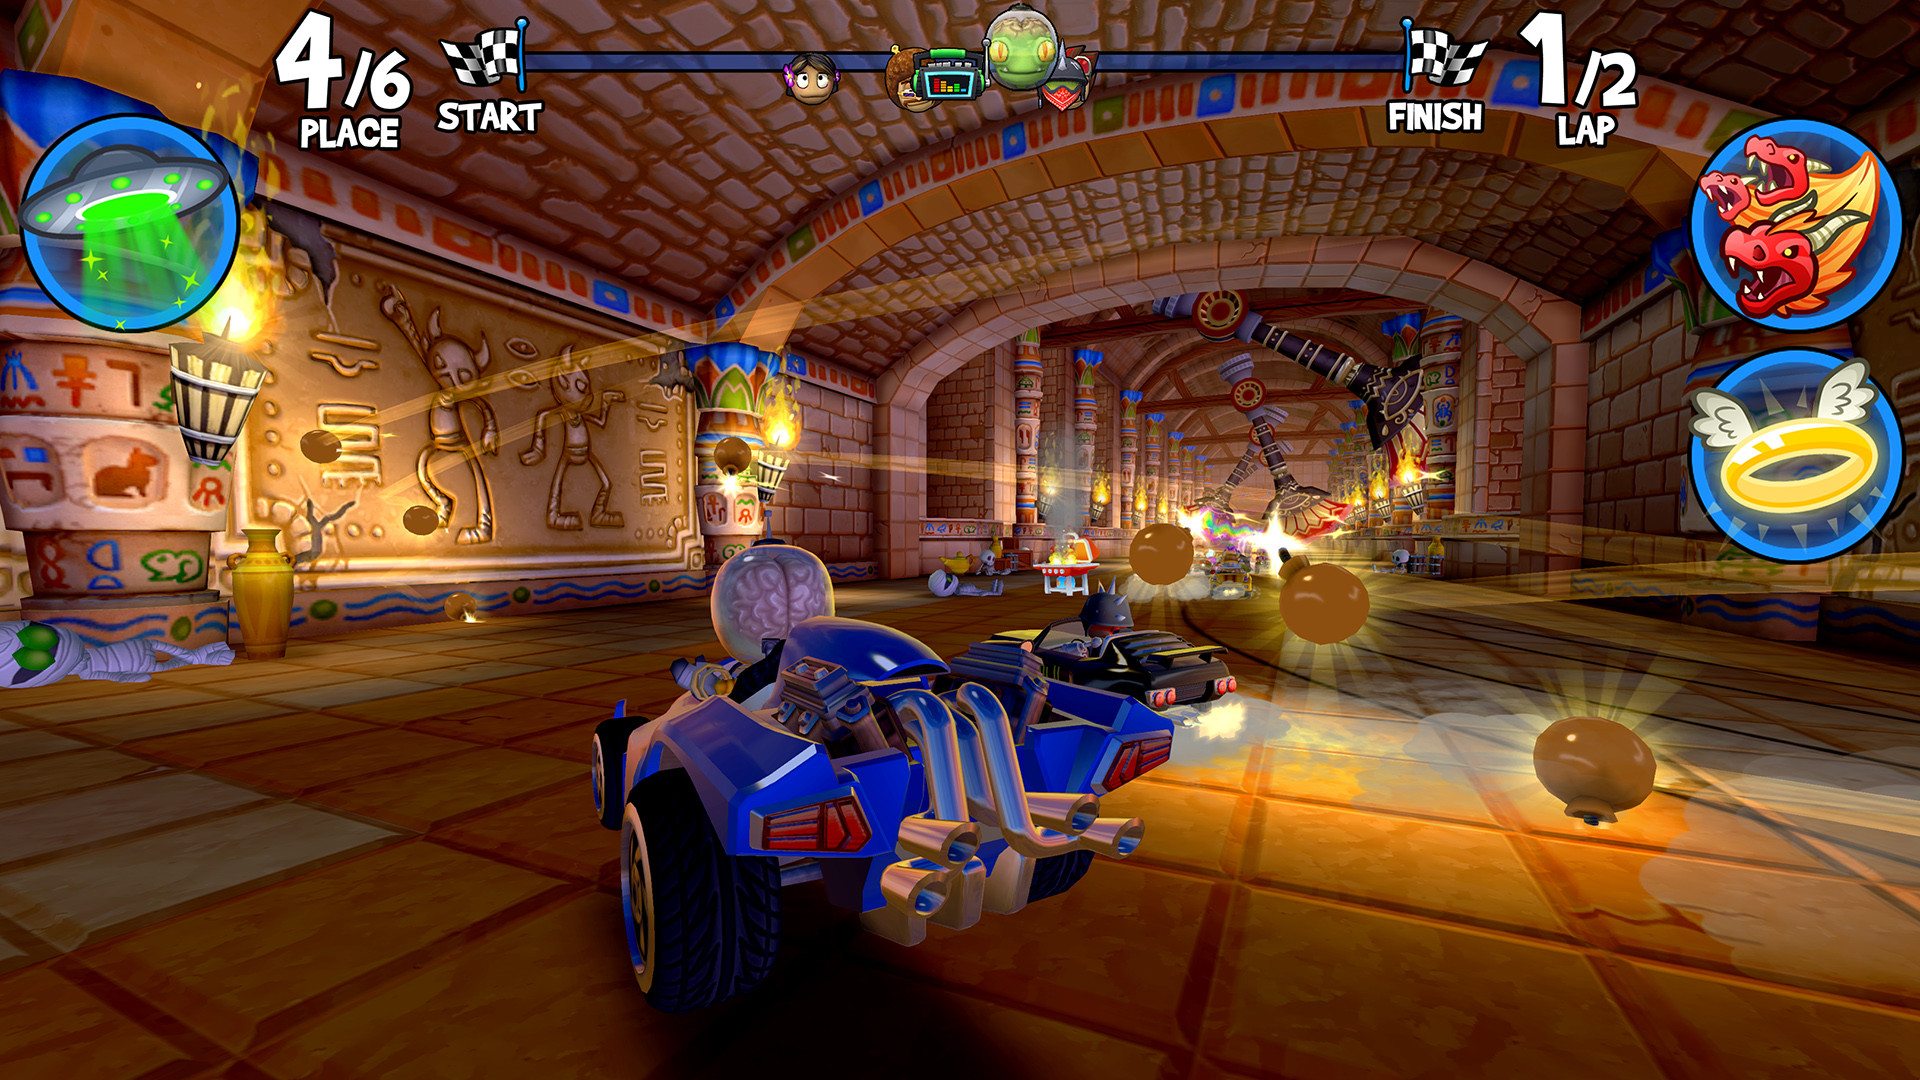 Find the best laptops for Beach Buggy Racing 2: Island Adventure